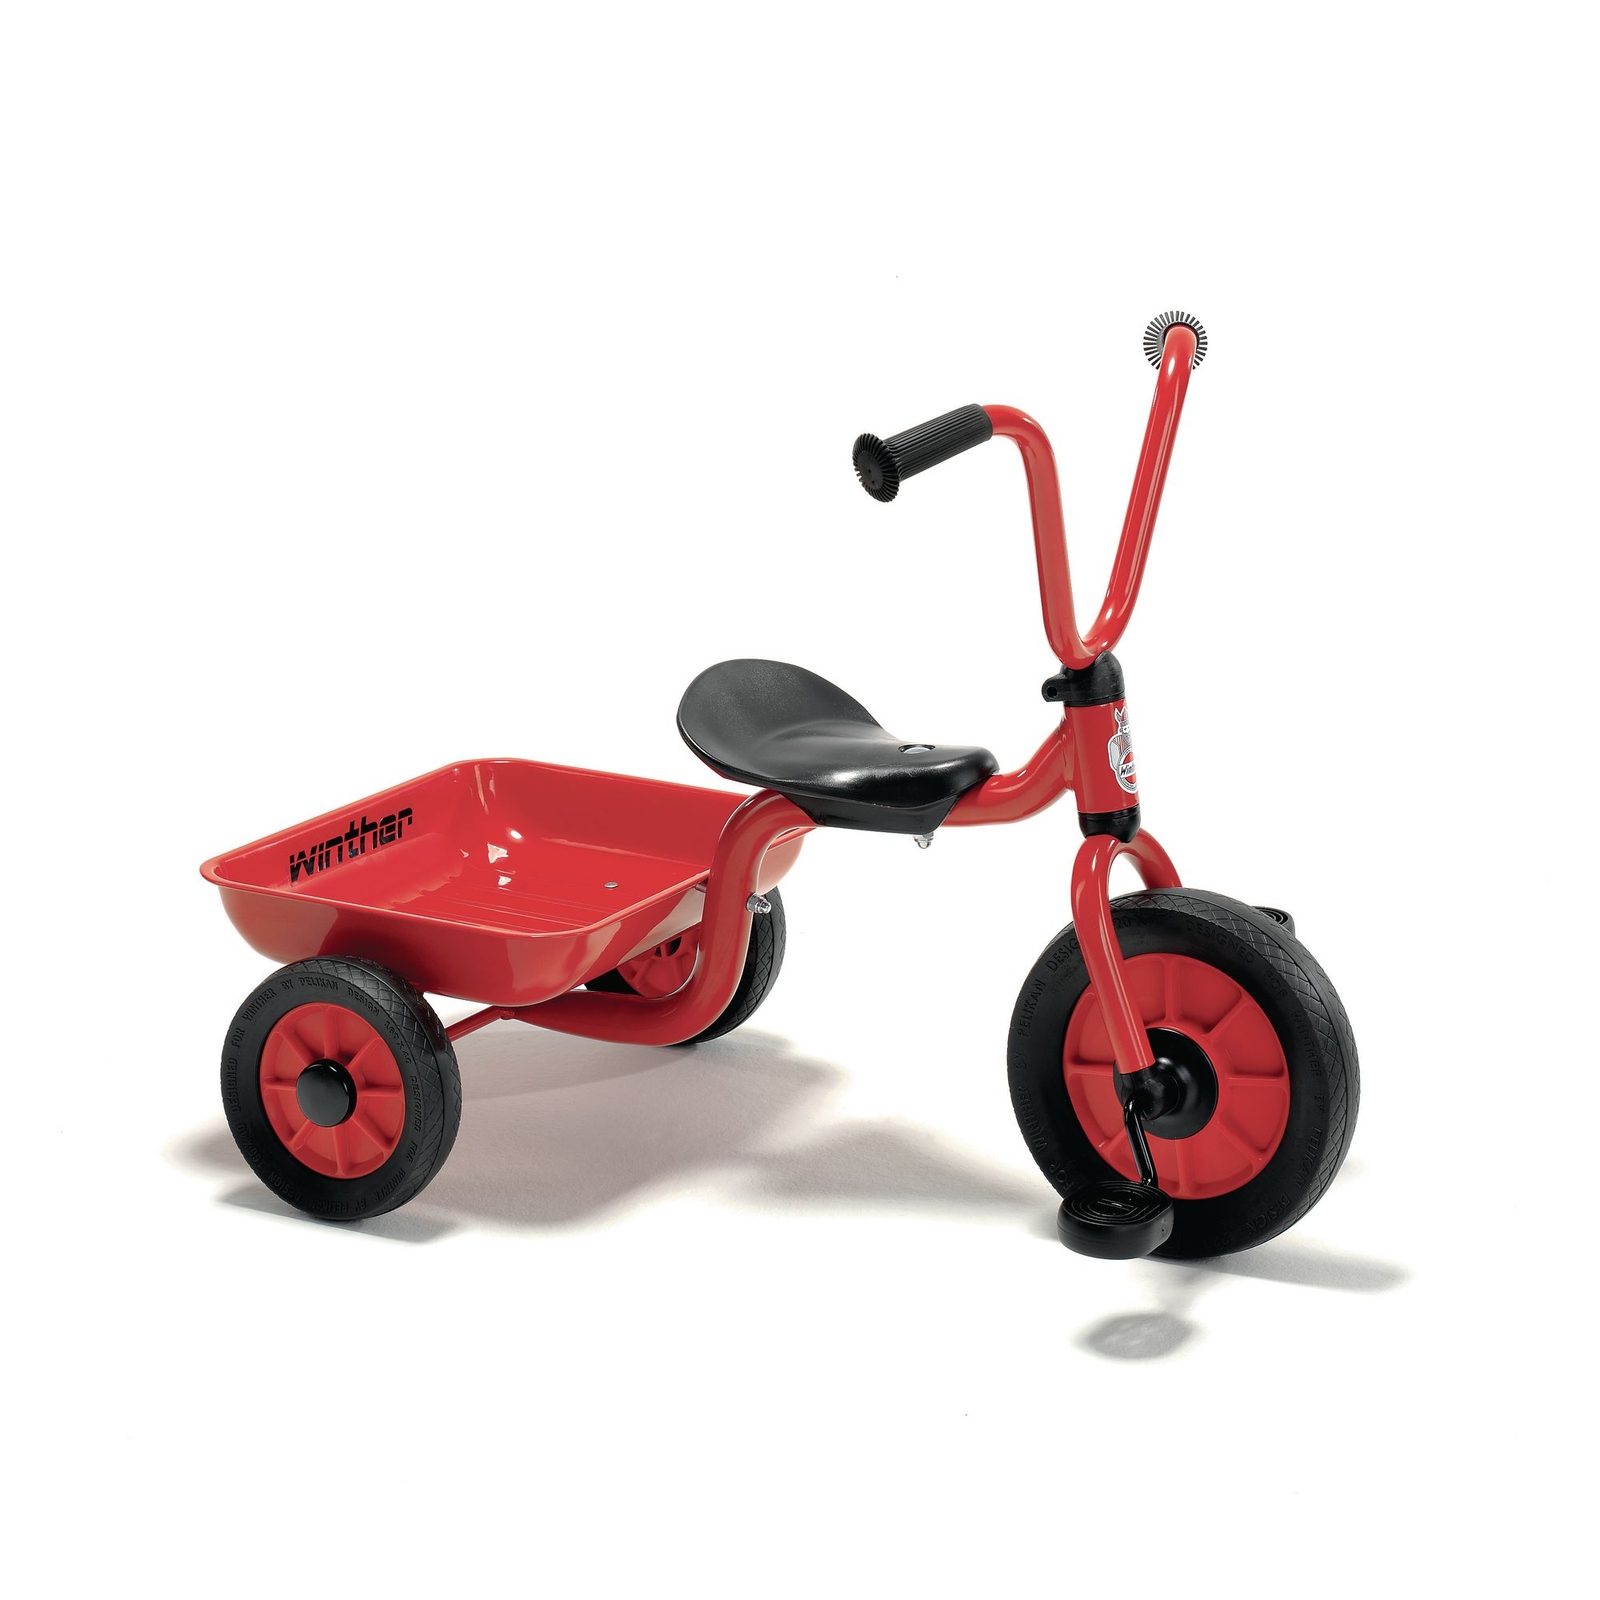 Winther Tricycle with Tray - L680 x W540 x H530mm - Each